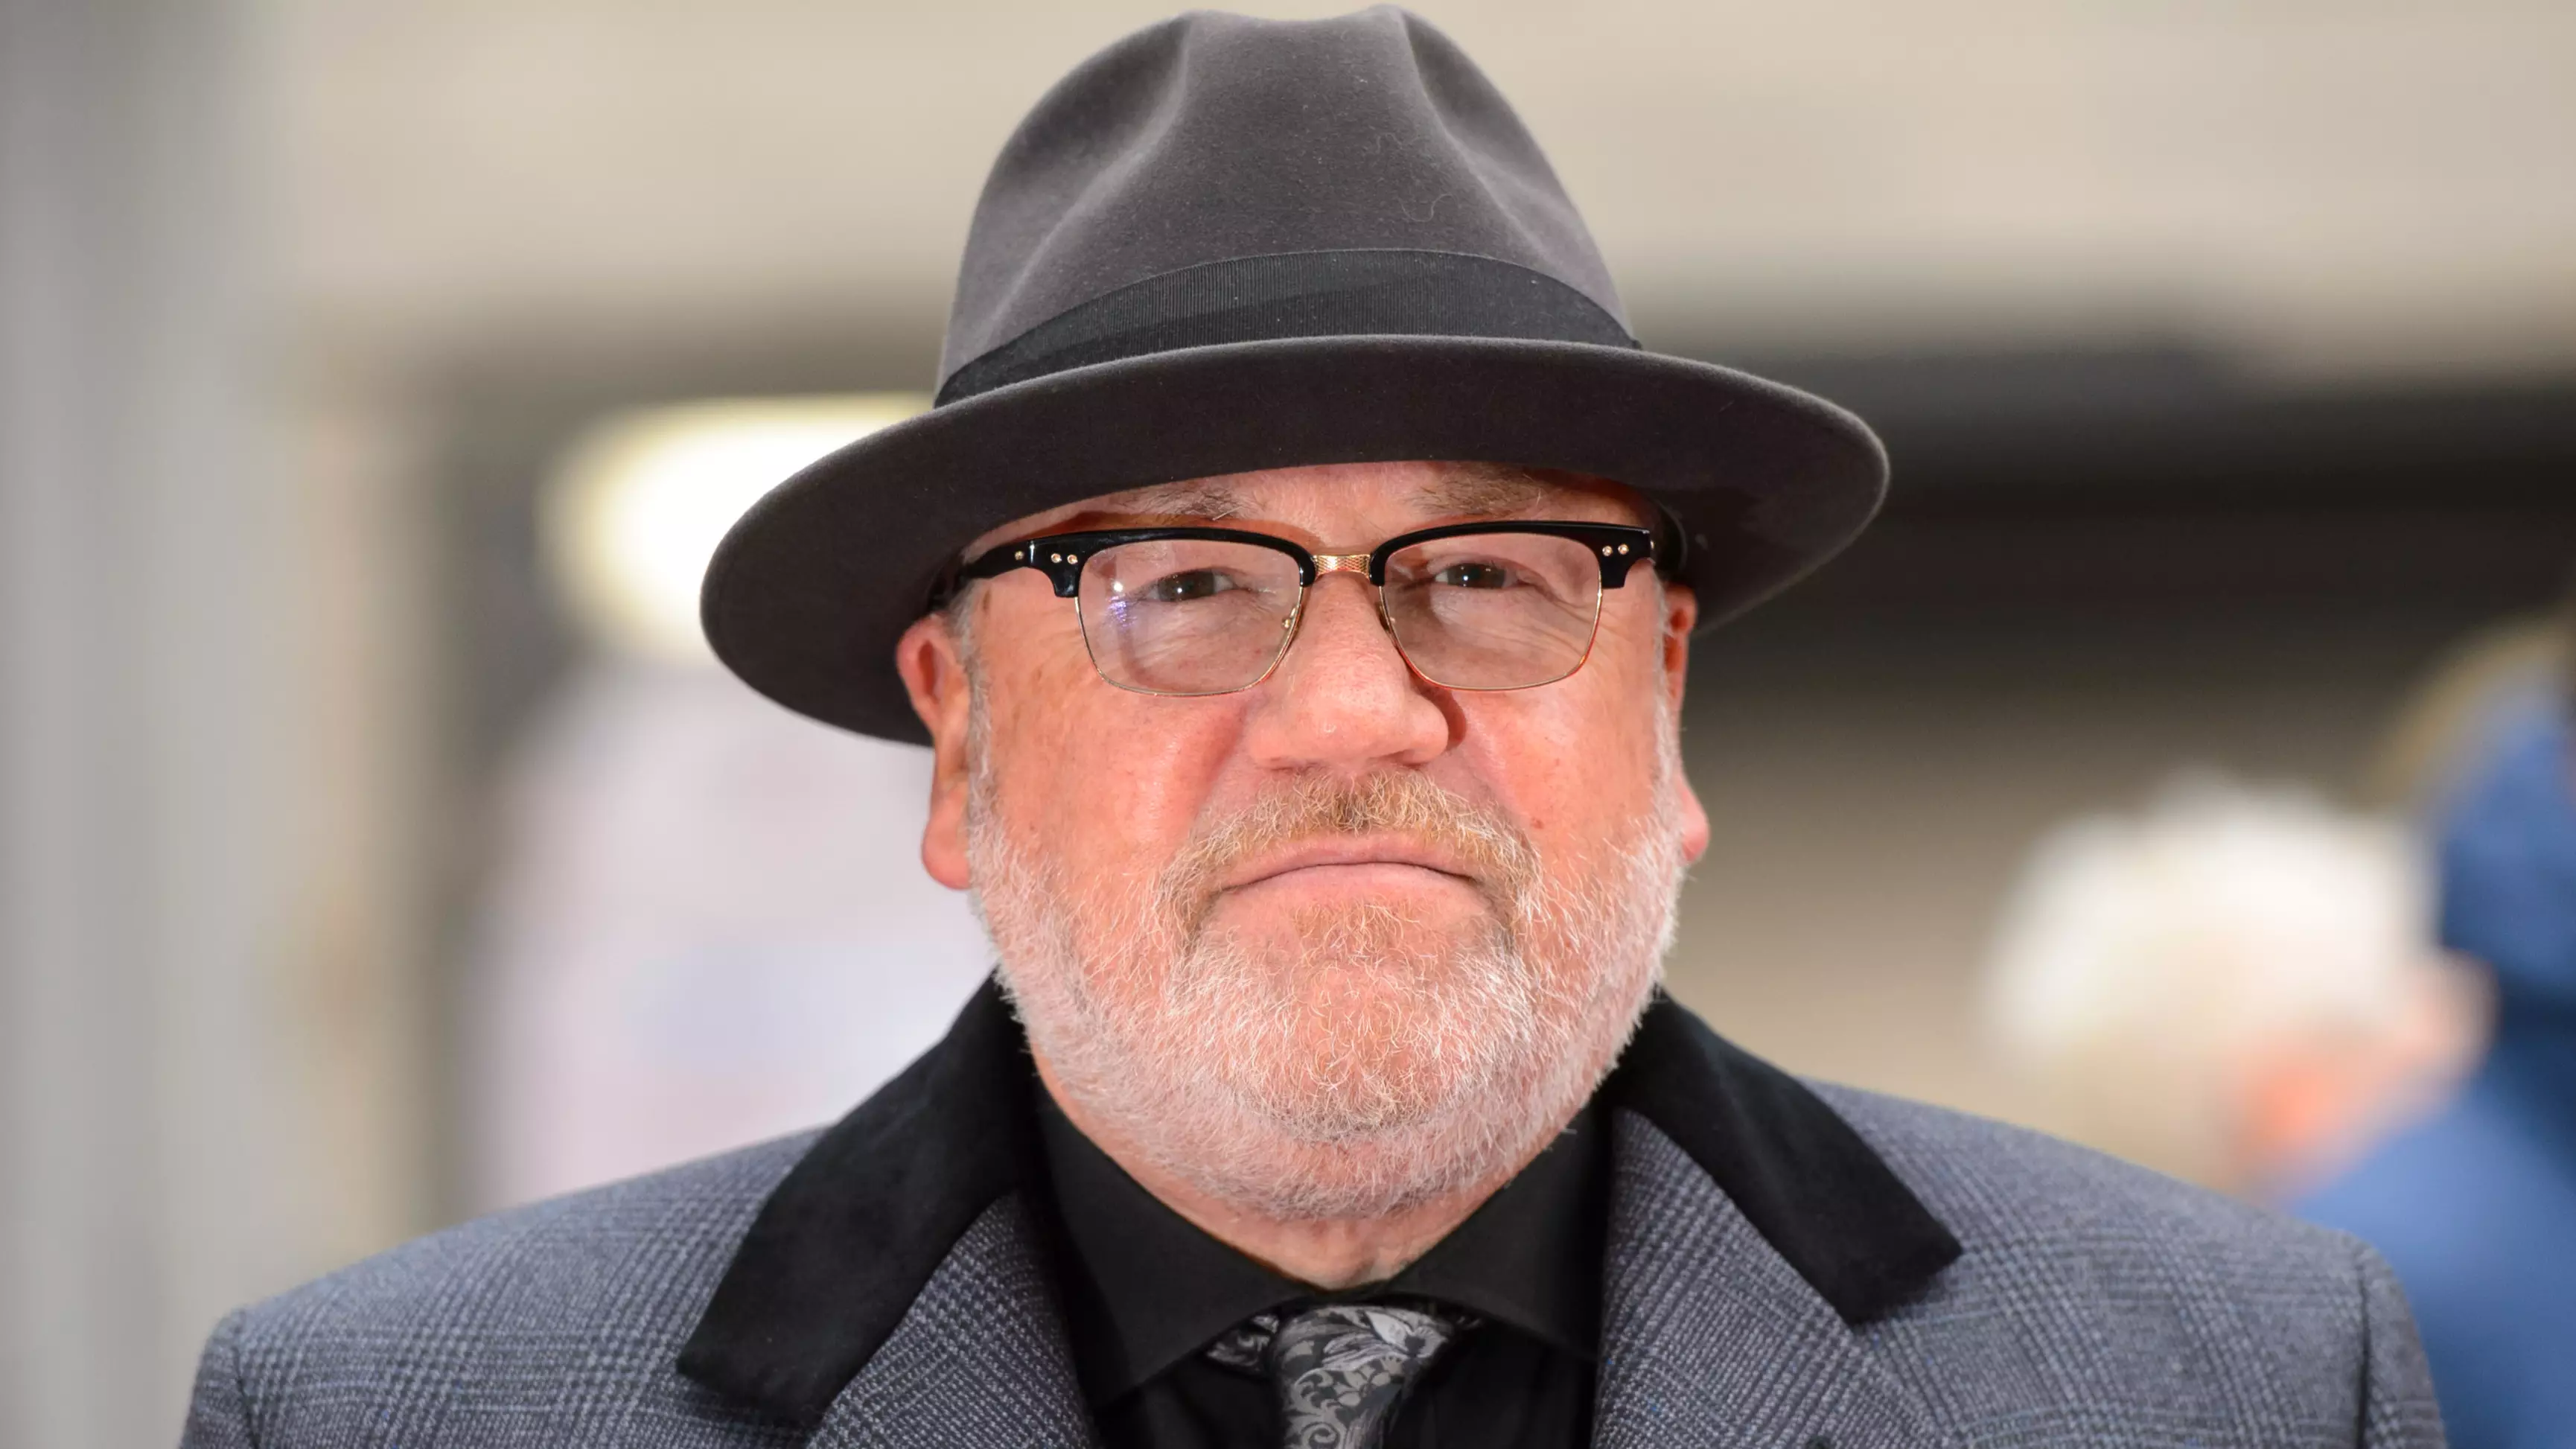 Ray Winstone Is Asking People To Donate Price Of A Pint To Those Struggling To Pay For Food And Rent During Pandemic